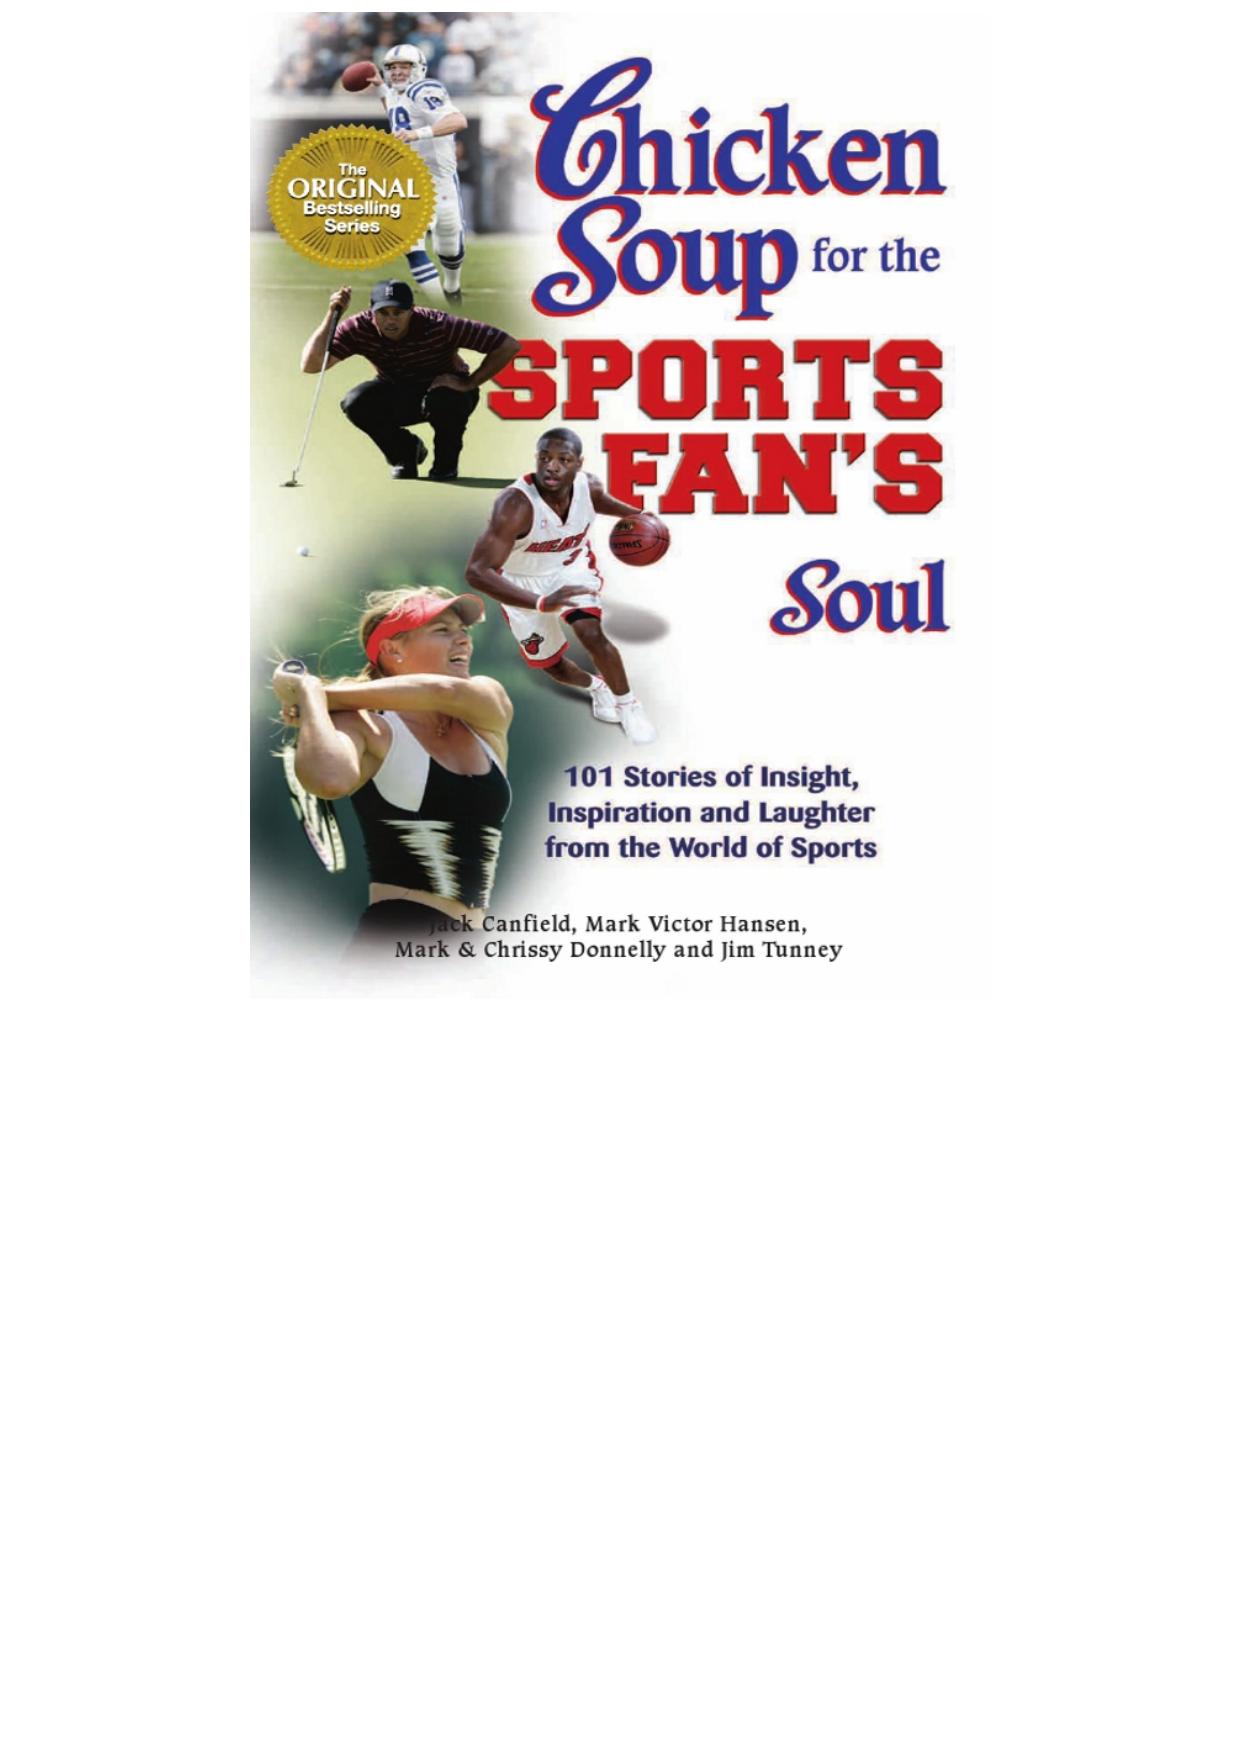 Chicken Soup for the Sports Fan's Soul: Stories of Insight, Inspiration and Laughter From the World of Sports